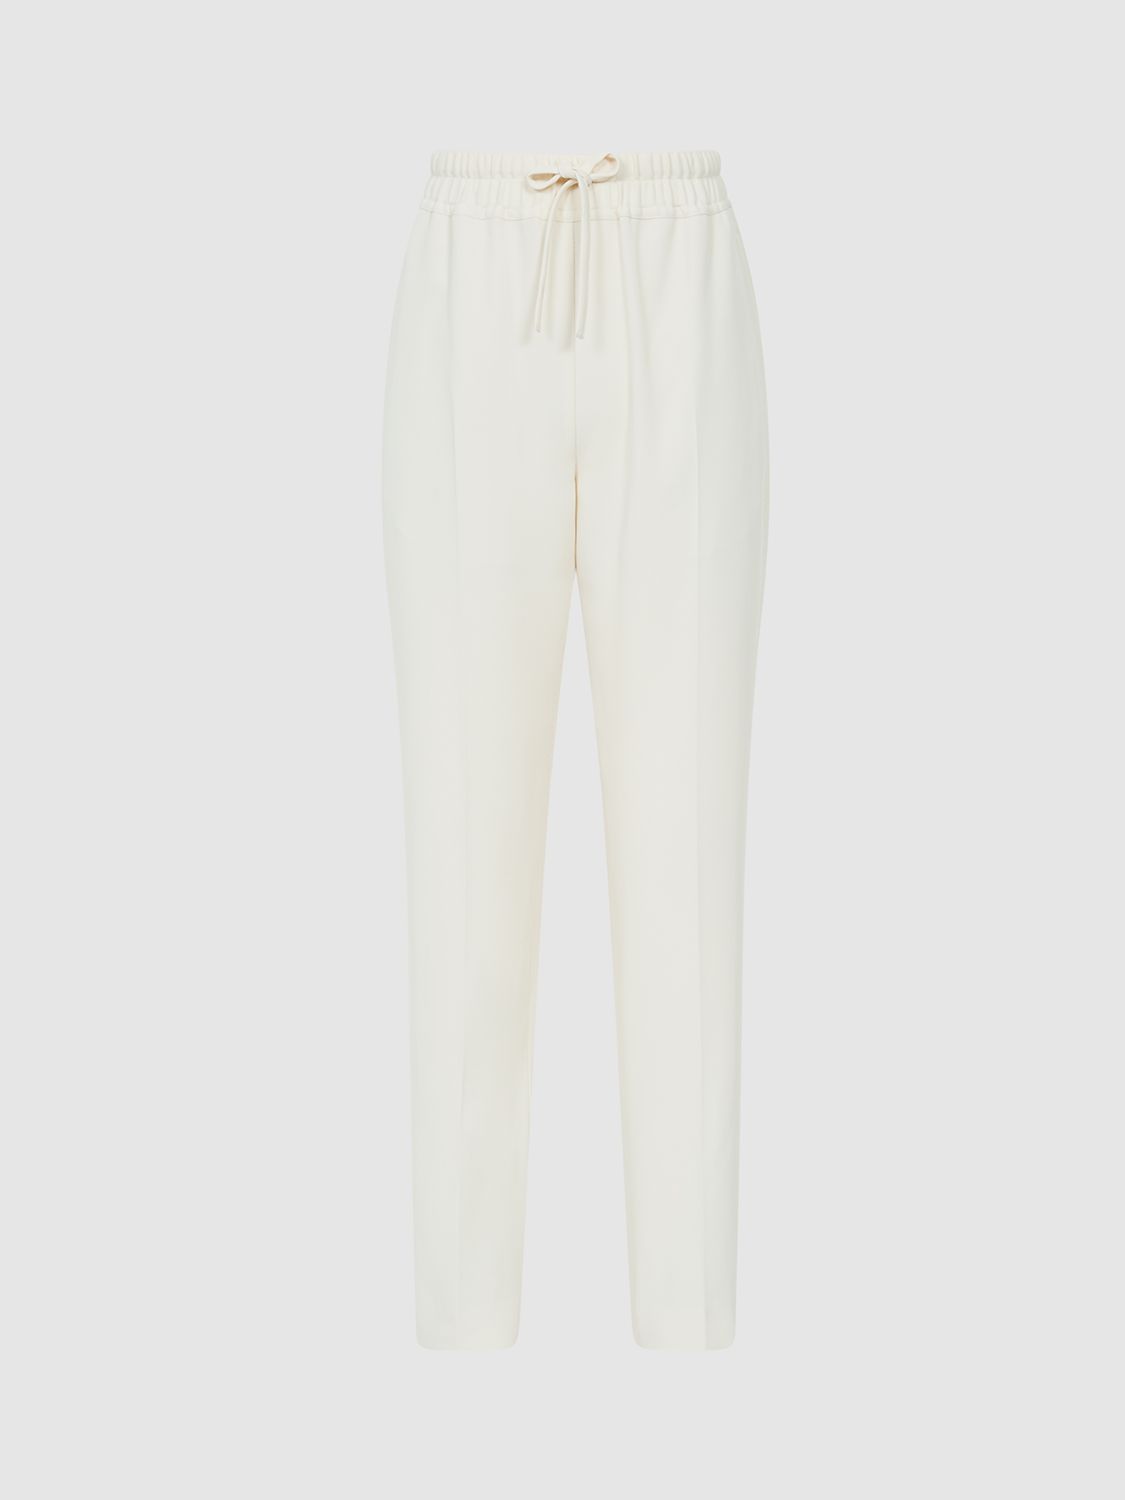 Reiss Petite Hailey Cropped Trousers, Cream at John Lewis & Partners